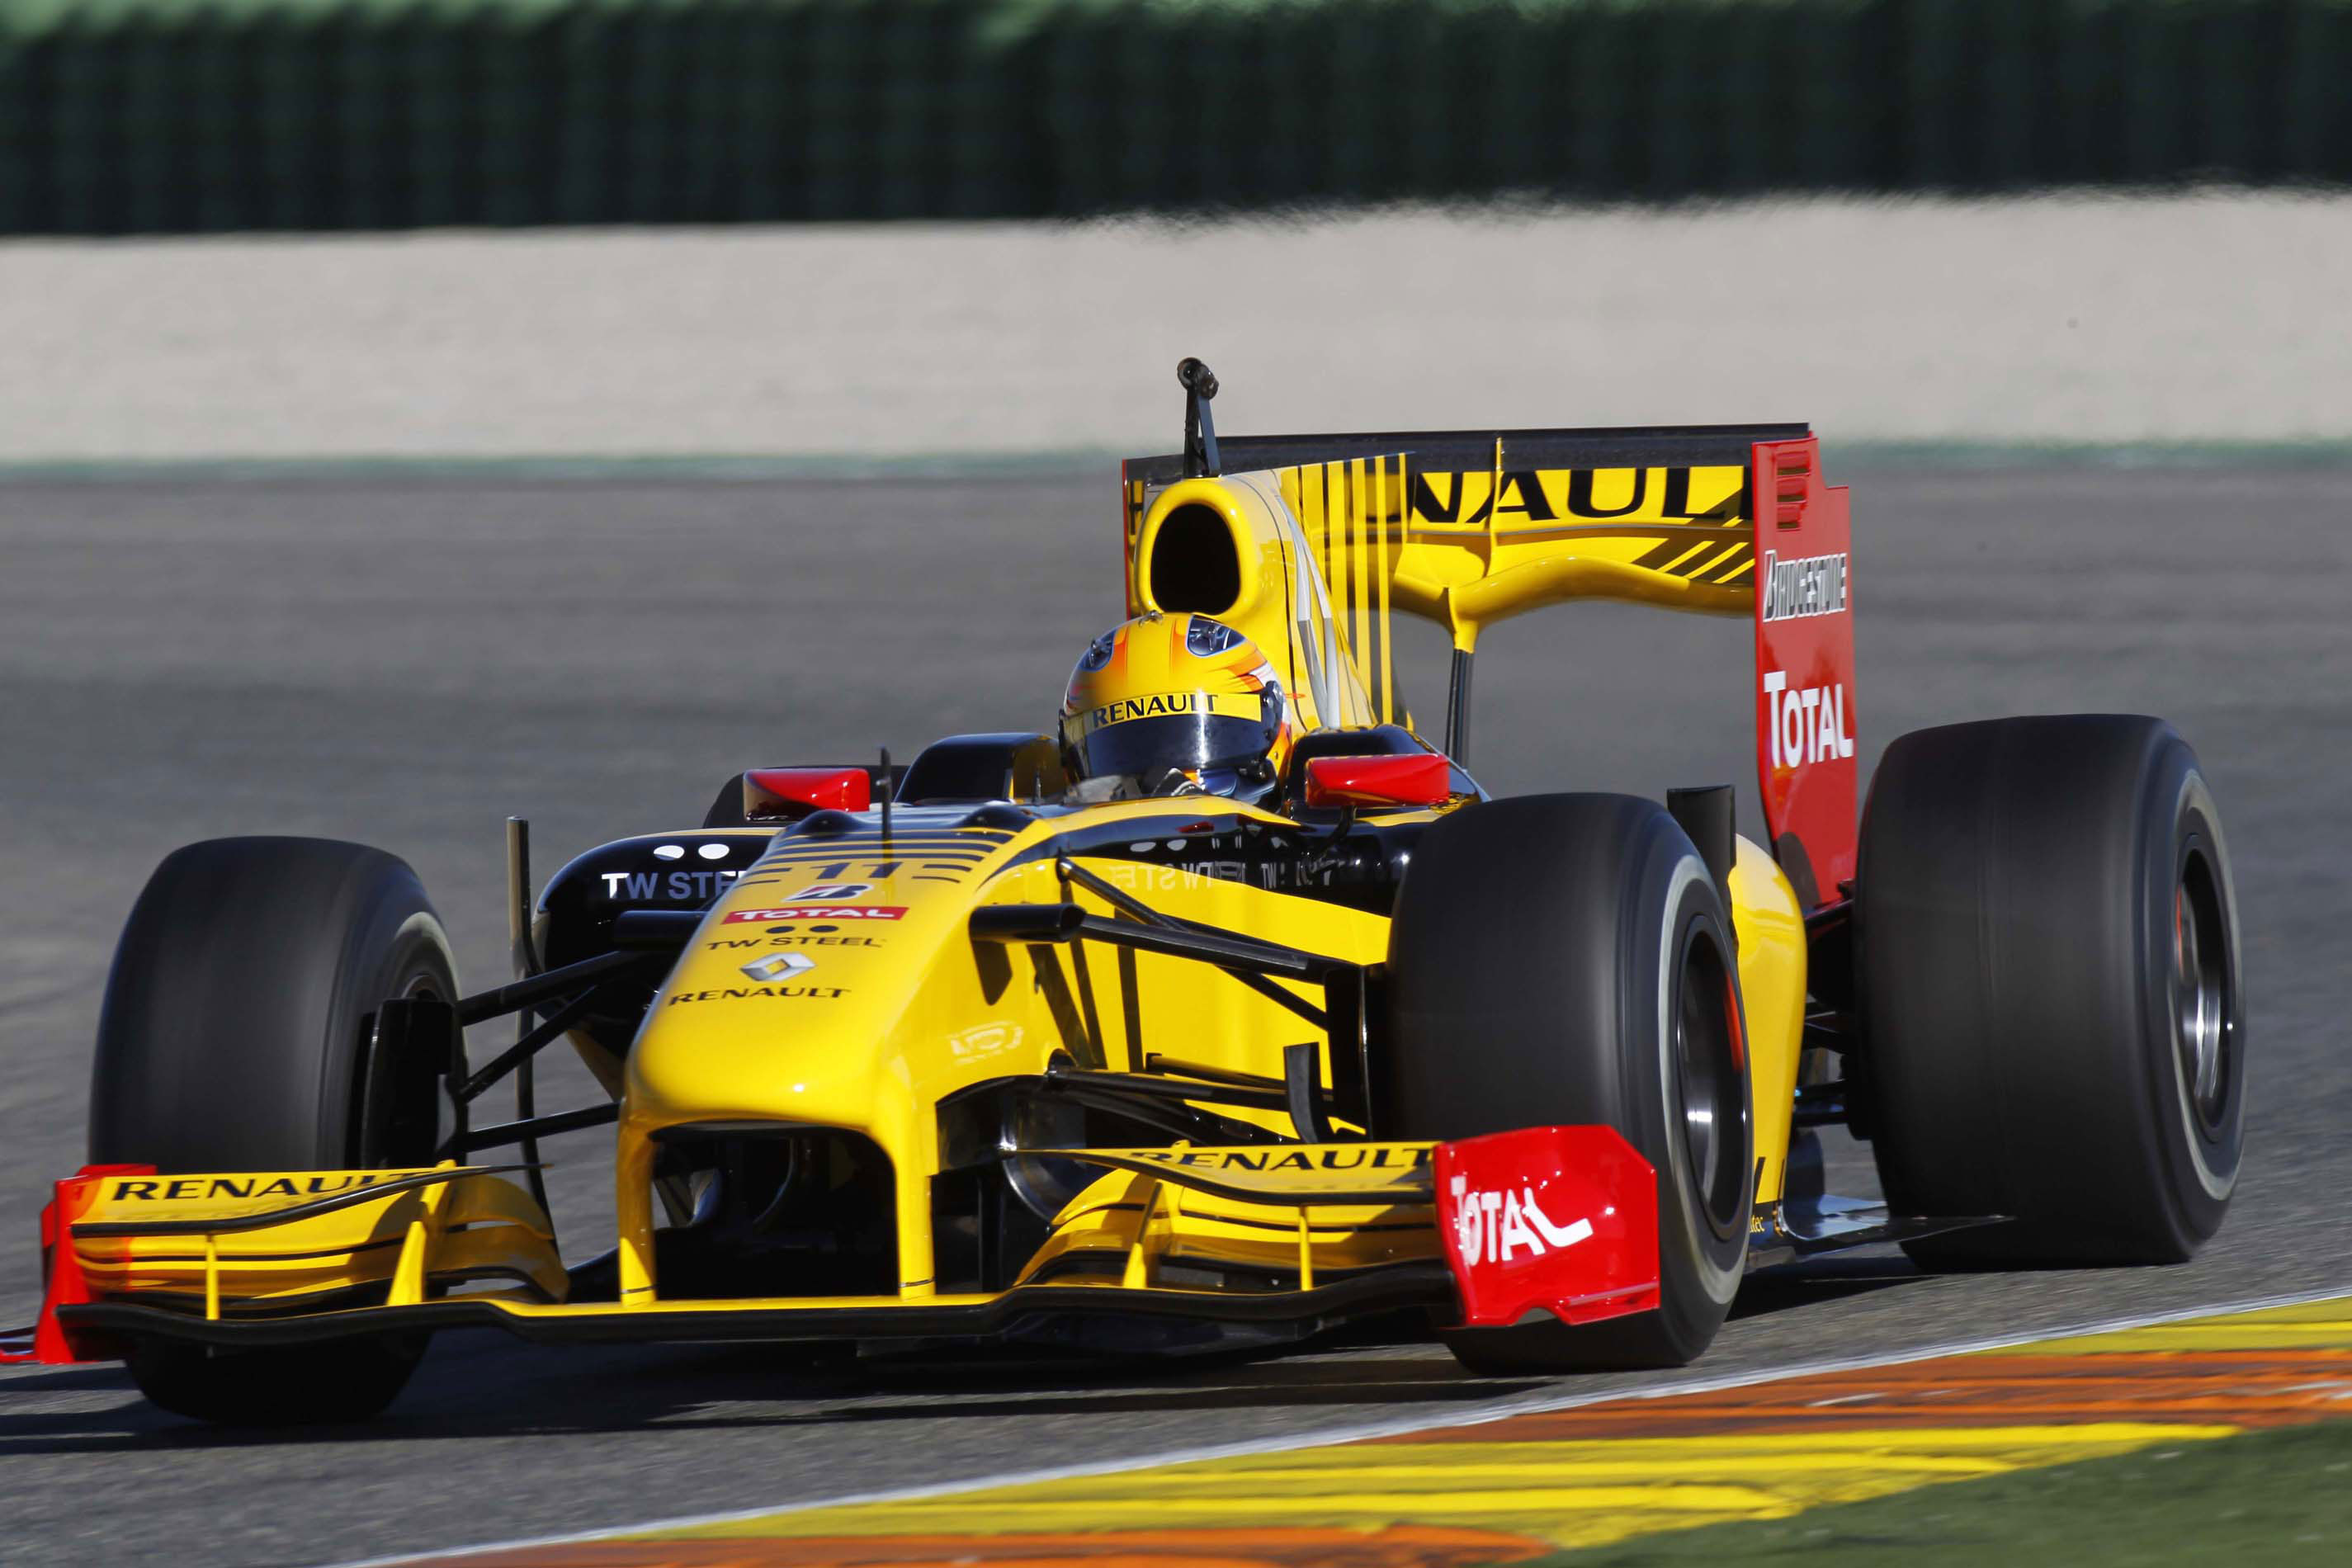 Renault R30 2010 by Renault